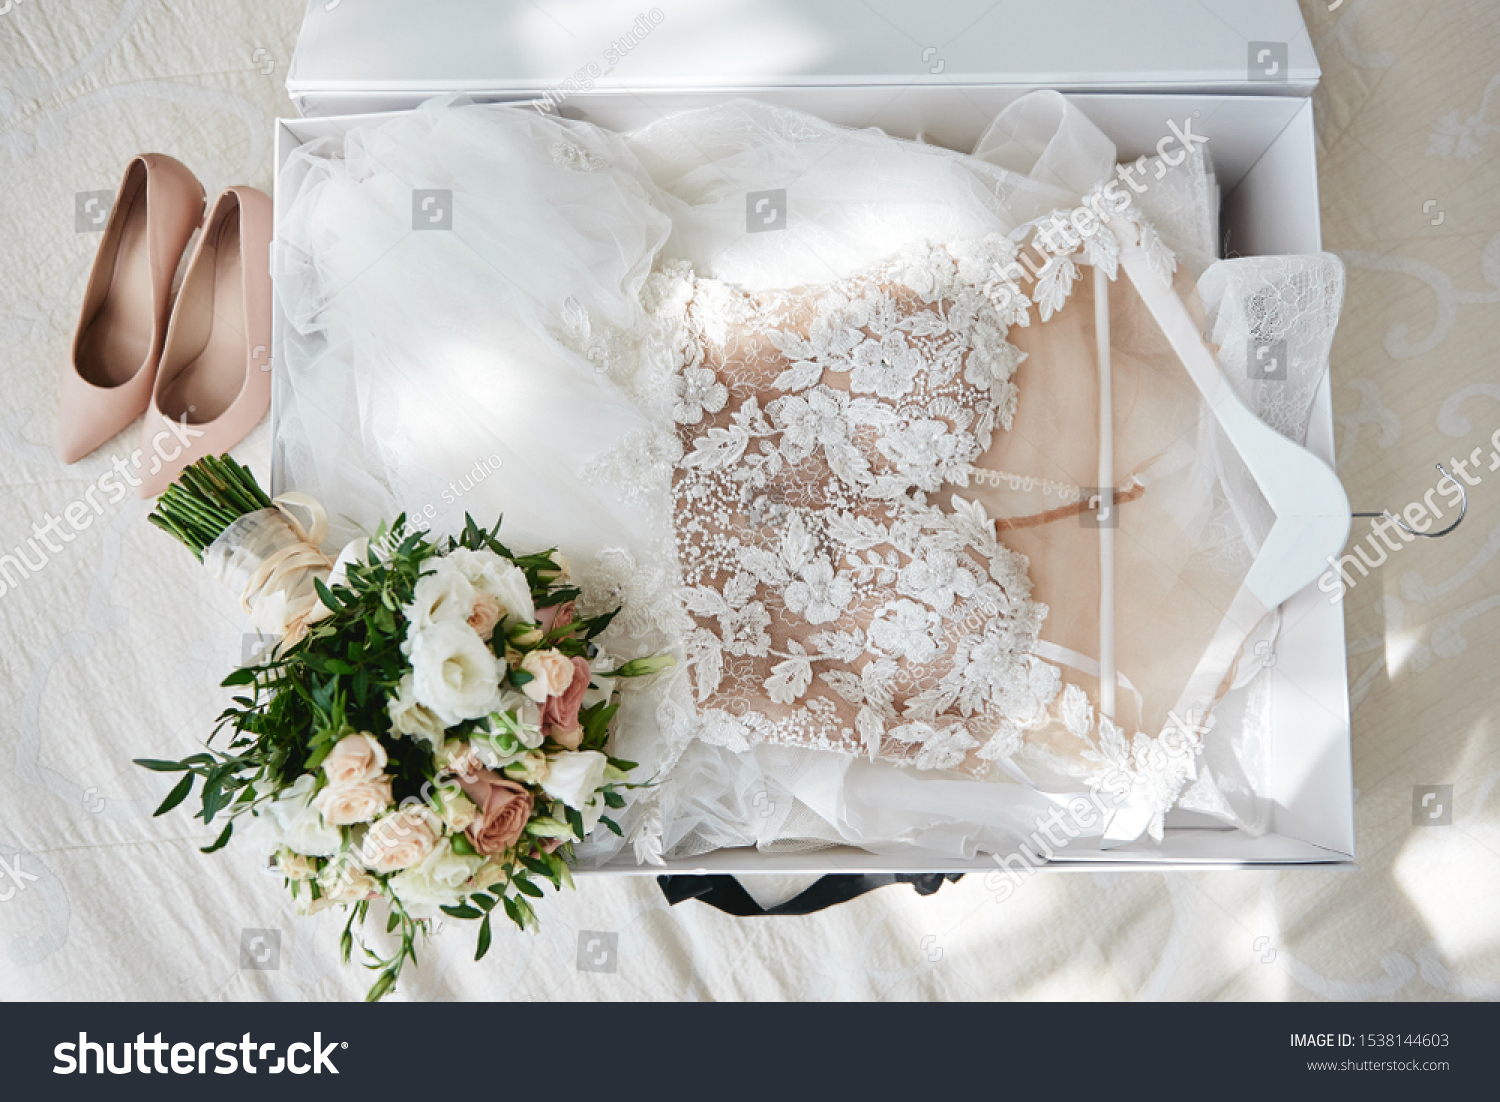 Luxury wedding dress in white box, beige women's shoes and bridal bouquet on bed, copy space. Bridal morning preparations. Wedding concept #1538144603